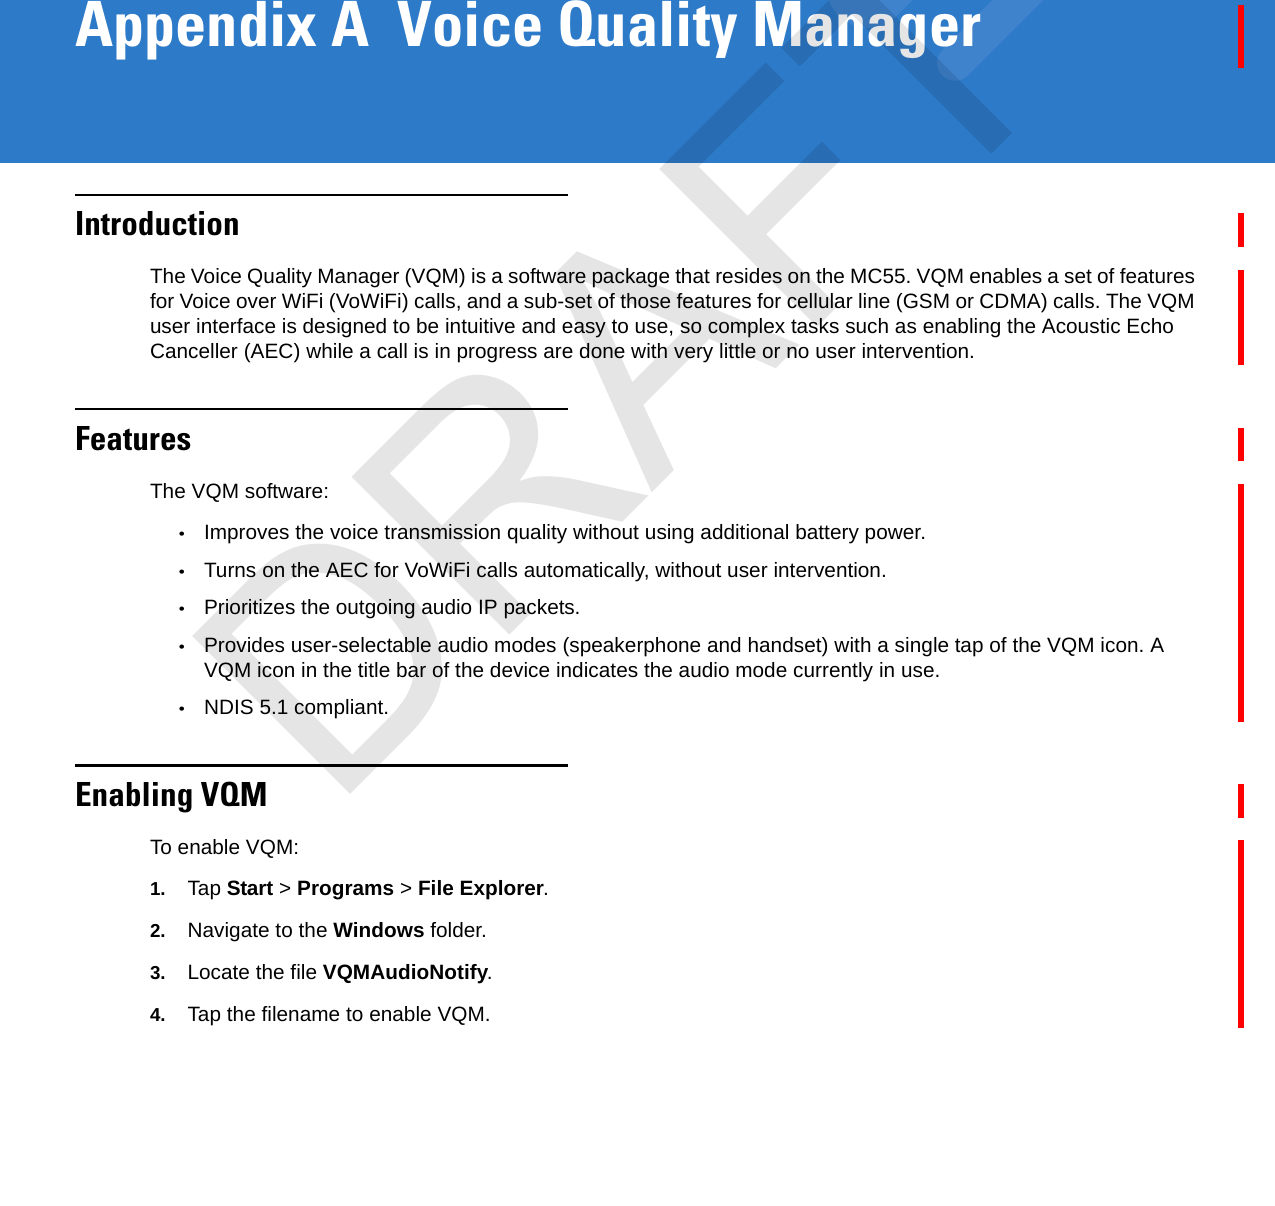 Appendix A  Voice Quality ManagerIntroductionThe Voice Quality Manager (VQM) is a software package that resides on the MC55. VQM enables a set of features for Voice over WiFi (VoWiFi) calls, and a sub-set of those features for cellular line (GSM or CDMA) calls. The VQM user interface is designed to be intuitive and easy to use, so complex tasks such as enabling the Acoustic Echo Canceller (AEC) while a call is in progress are done with very little or no user intervention.FeaturesThe VQM software:•Improves the voice transmission quality without using additional battery power.•Turns on the AEC for VoWiFi calls automatically, without user intervention.•Prioritizes the outgoing audio IP packets.•Provides user-selectable audio modes (speakerphone and handset) with a single tap of the VQM icon. A VQM icon in the title bar of the device indicates the audio mode currently in use.•NDIS 5.1 compliant.Enabling VQMTo enable VQM:1. Tap Start &gt; Programs &gt; File Explorer.2. Navigate to the Windows folder.3. Locate the file VQMAudioNotify.4. Tap the filename to enable VQM.DRAFT